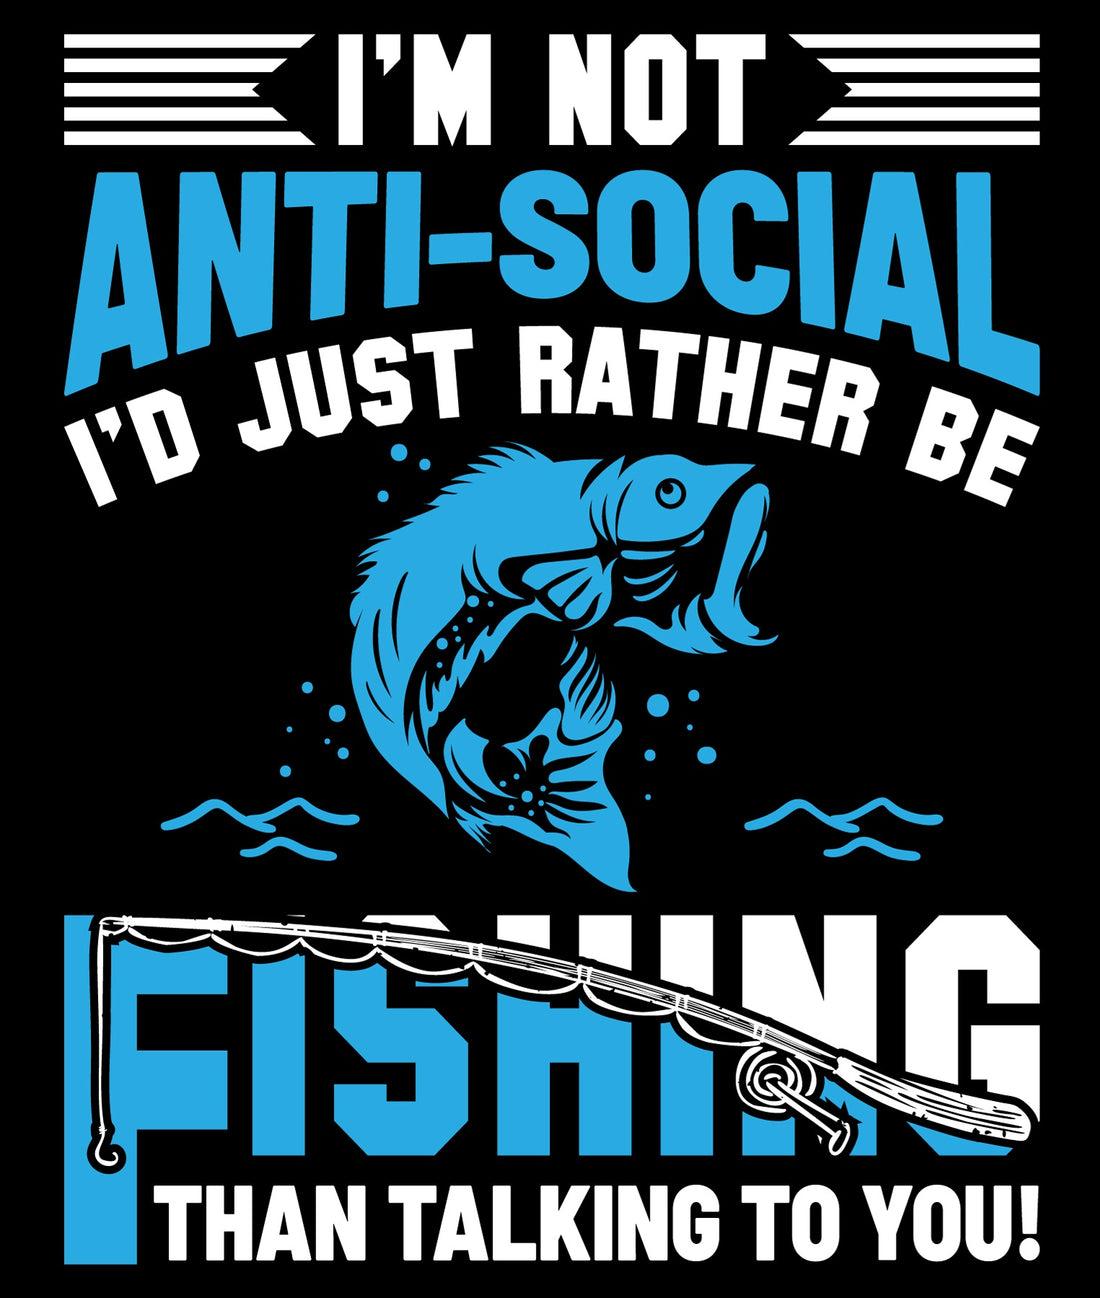 Who Makes the Best Fishing Shirts in Australia? Get On It Apparel